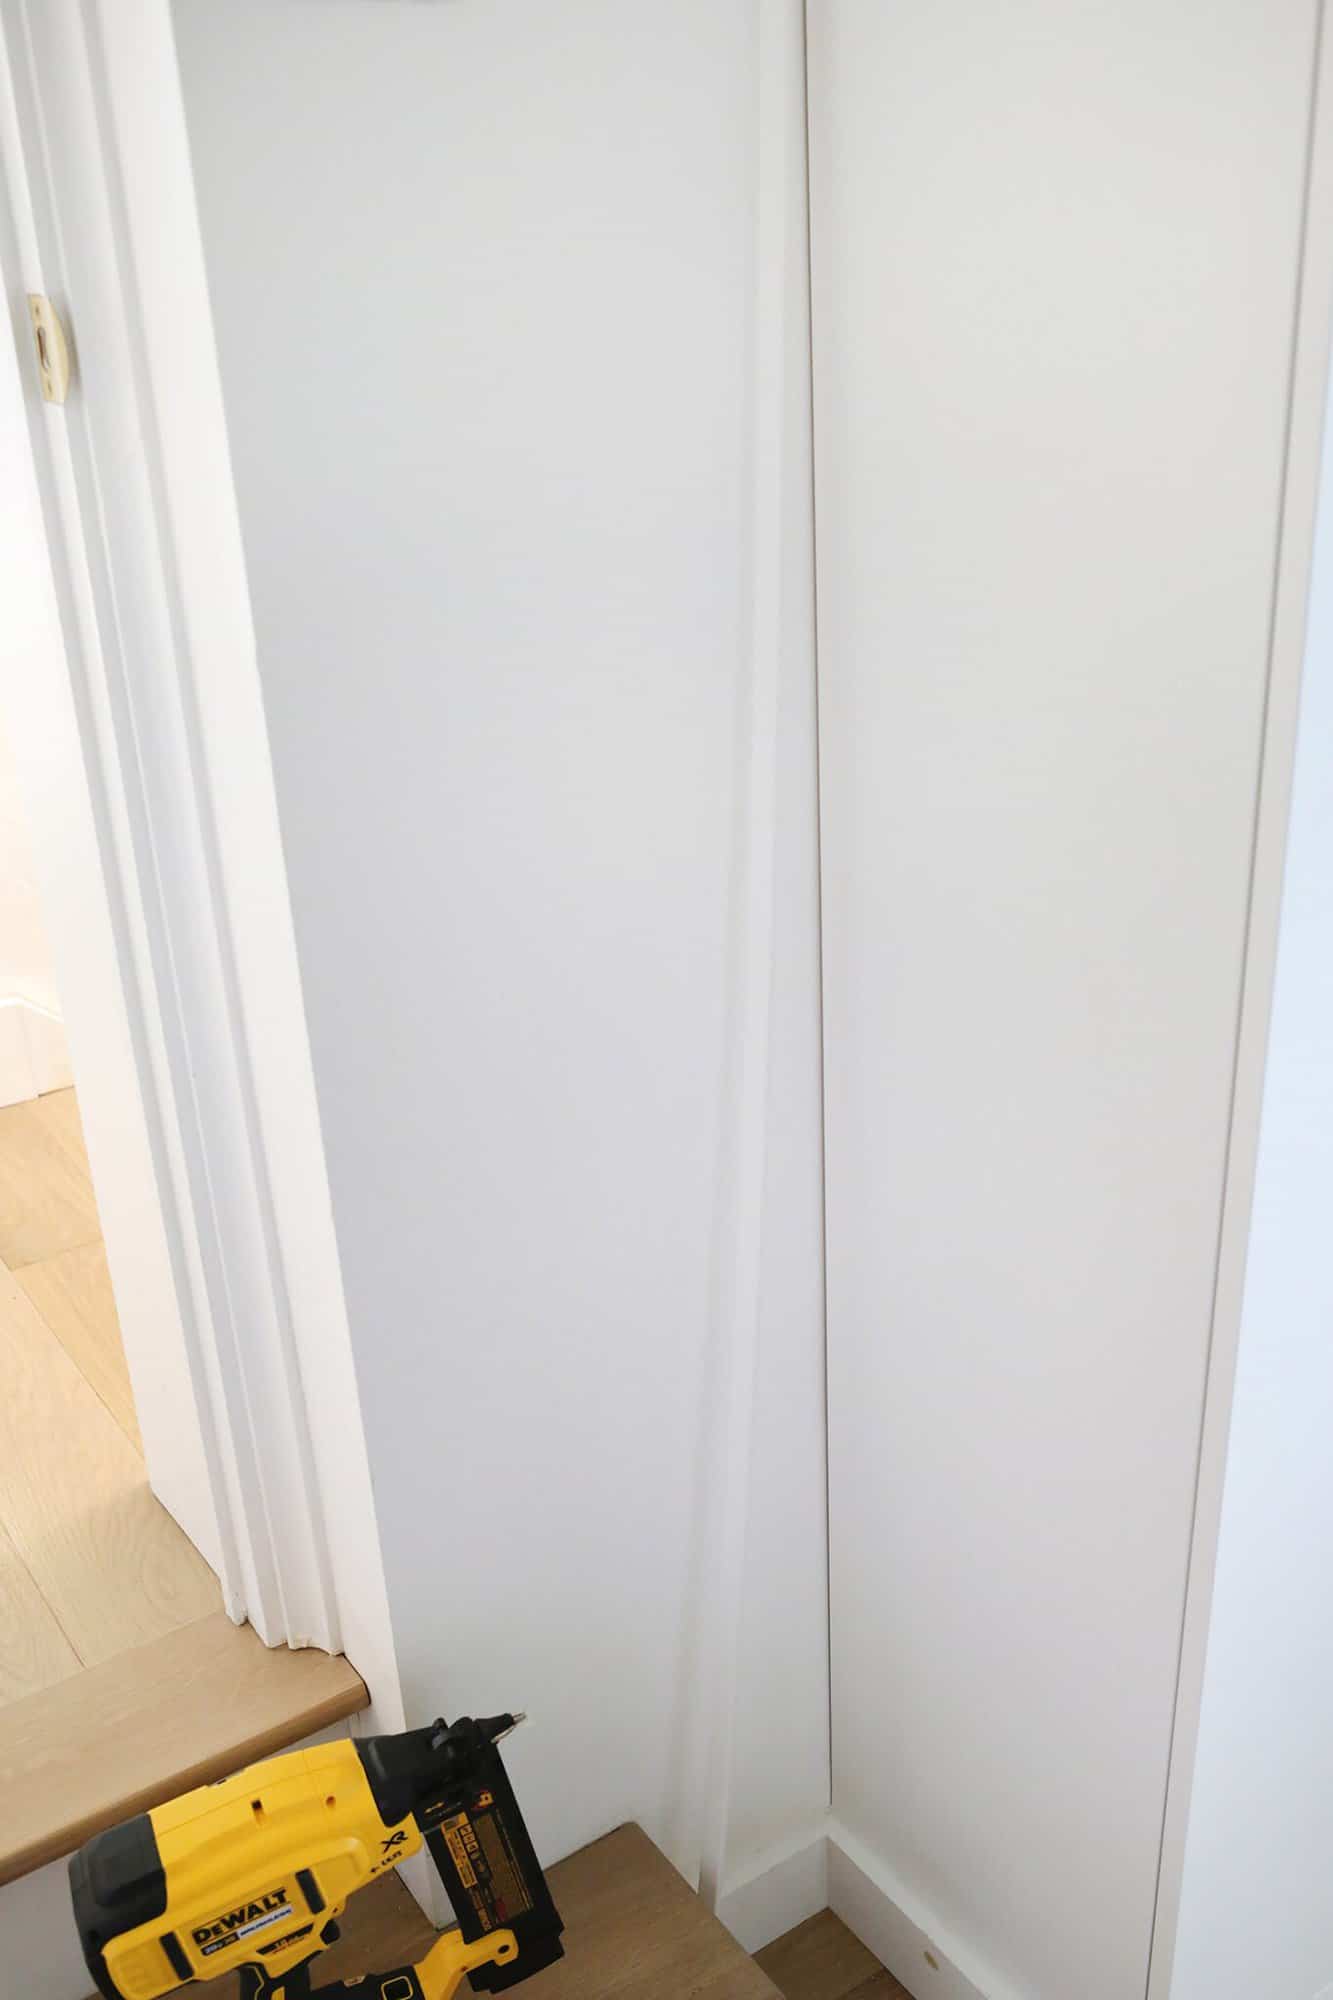 trim piece for wardrobe leaning against wall